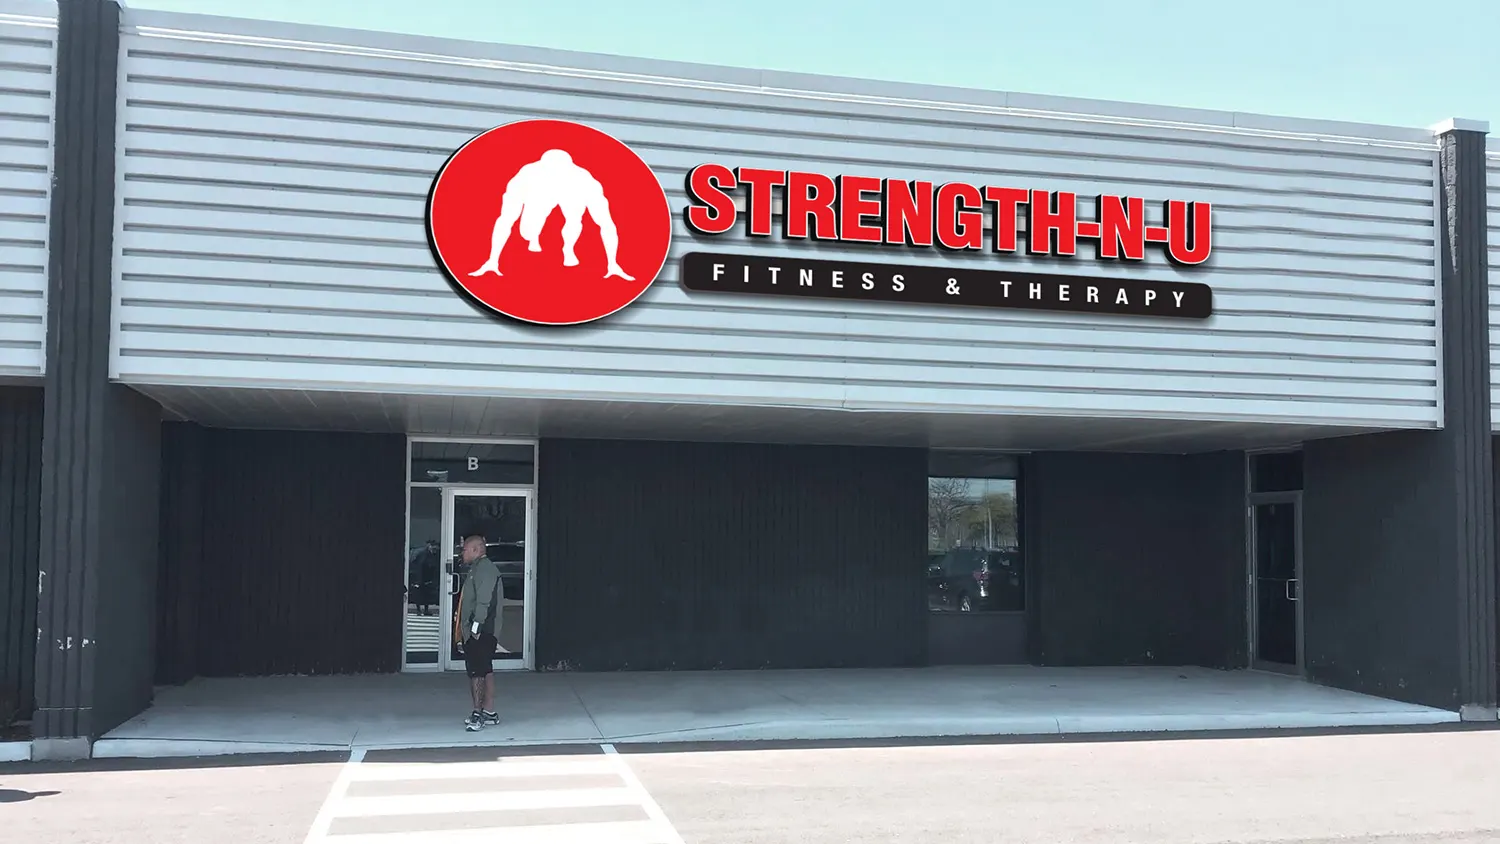 Exterior design project for Strength-N-U. Designed storefront with a bold channel letter lightbox on a huge existing facade